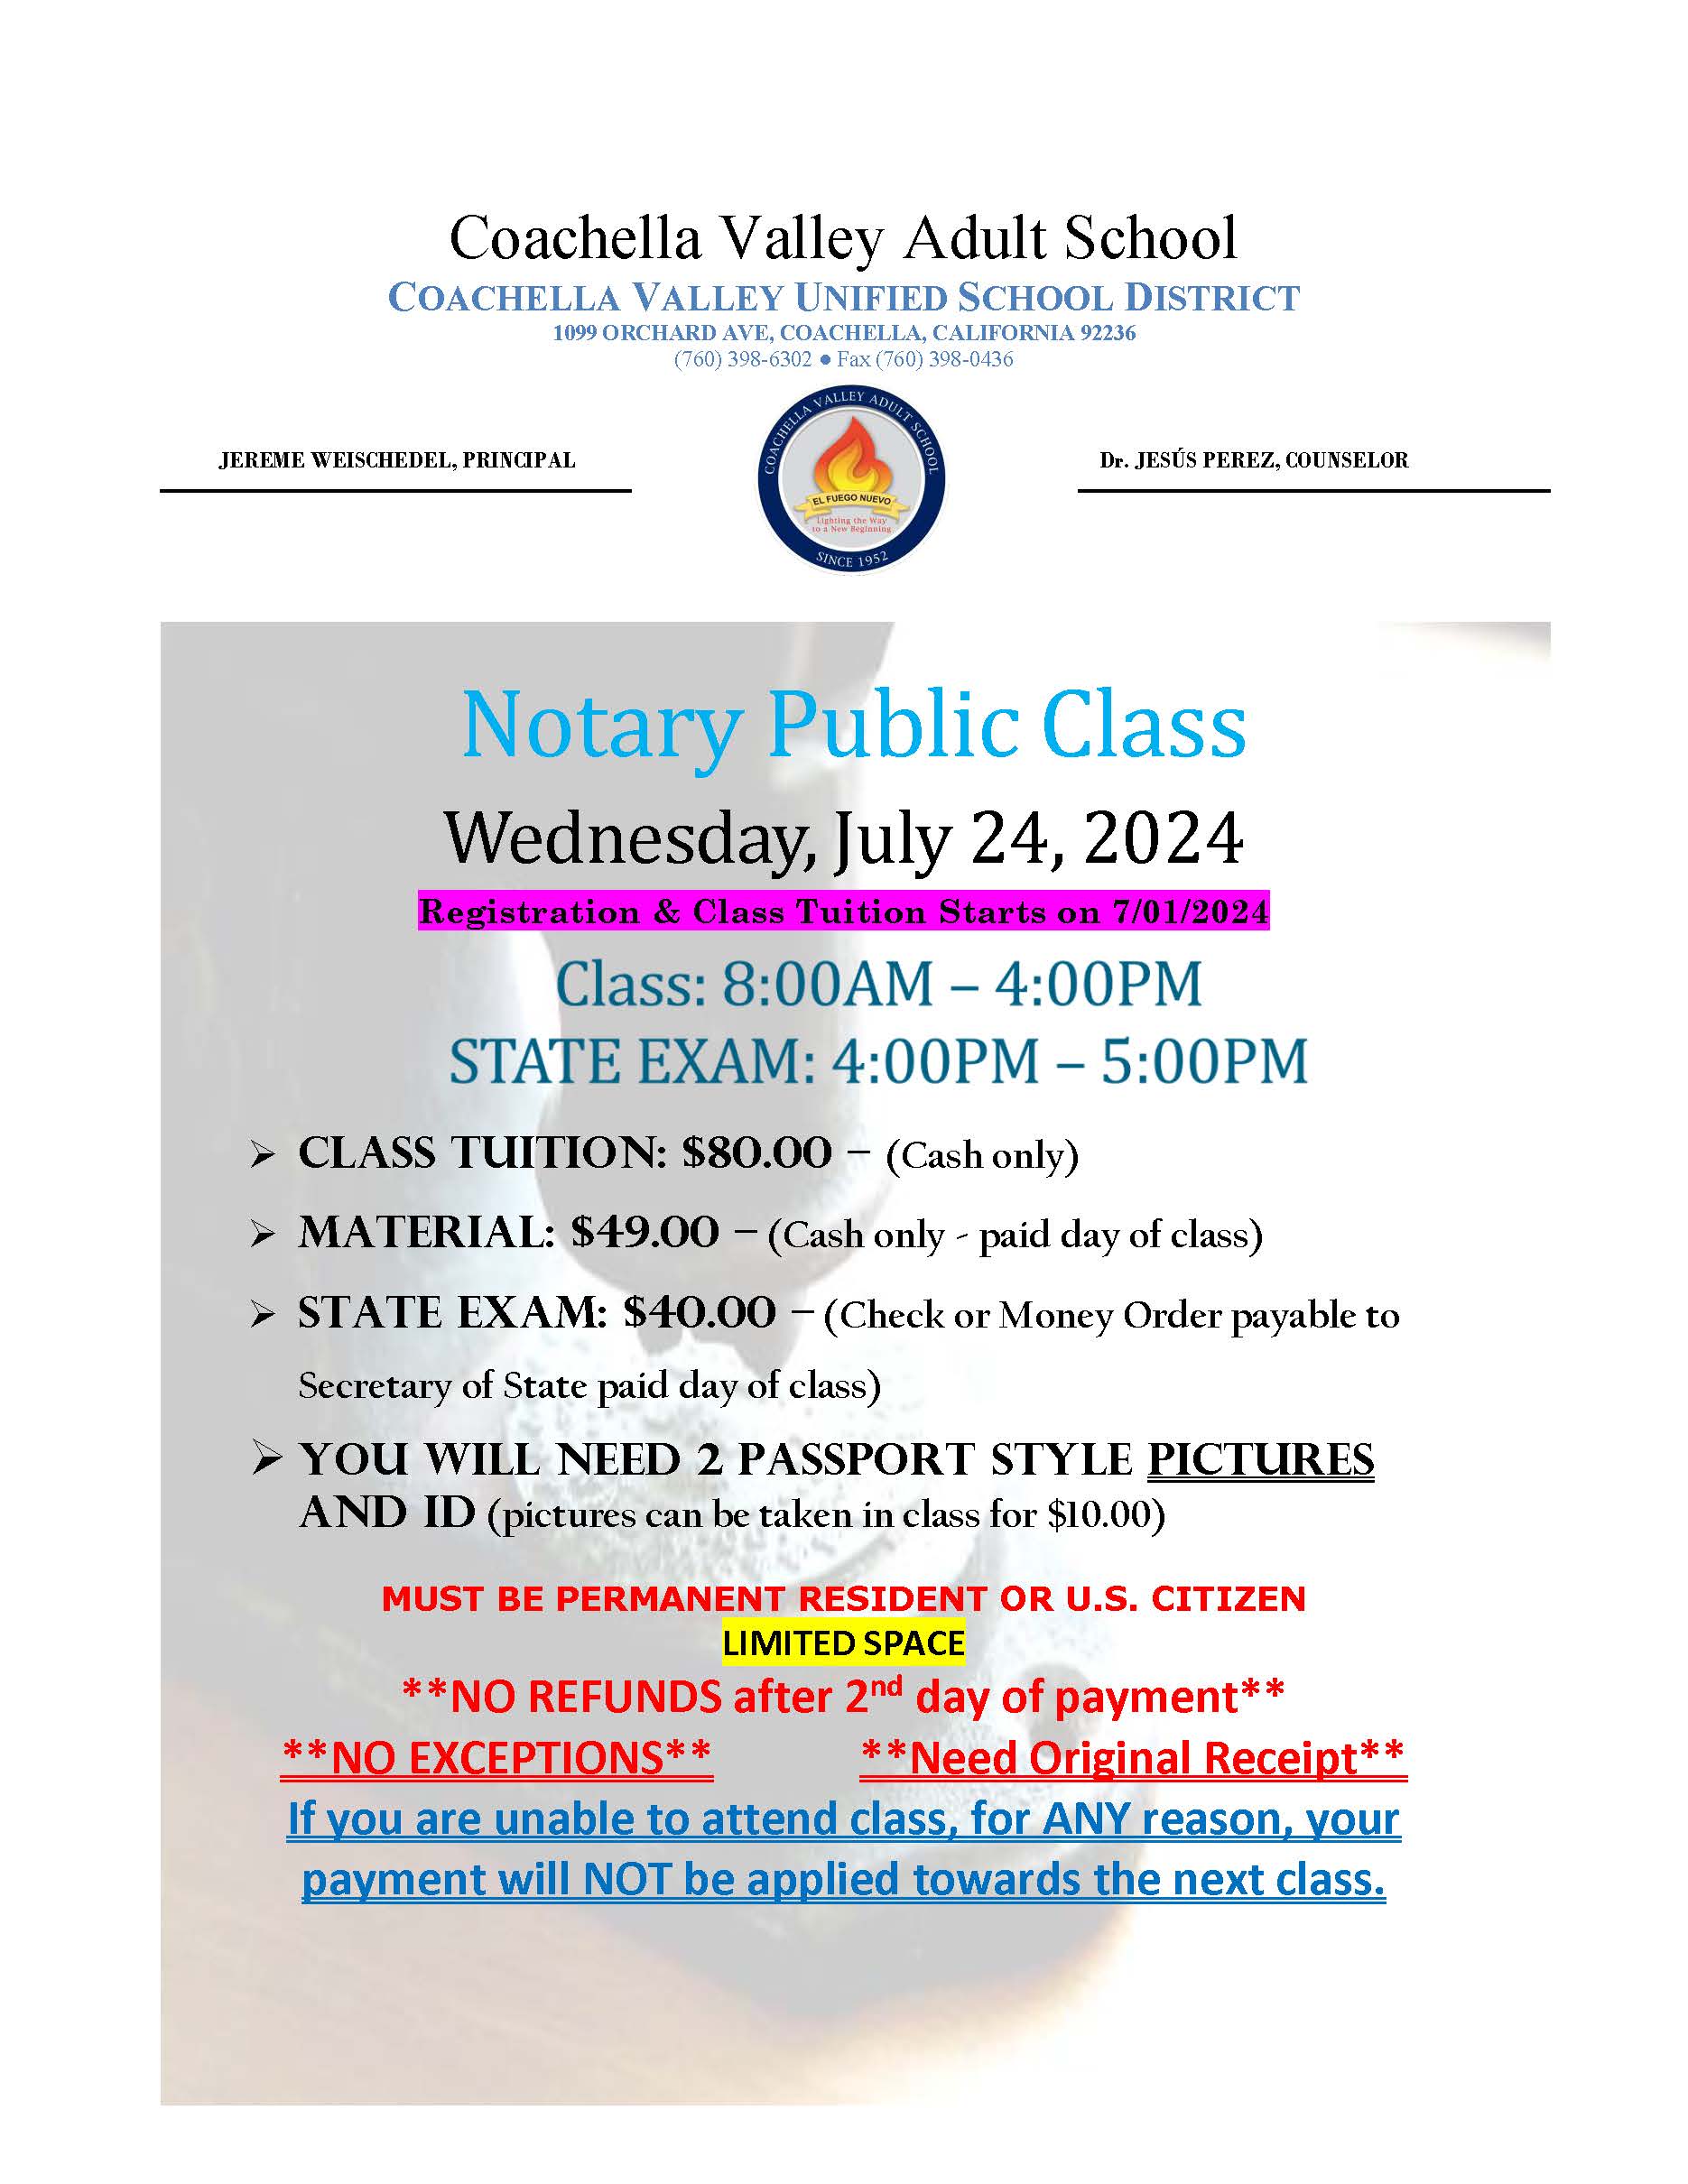 Notary Public Class Flyer July 2024 Ruth